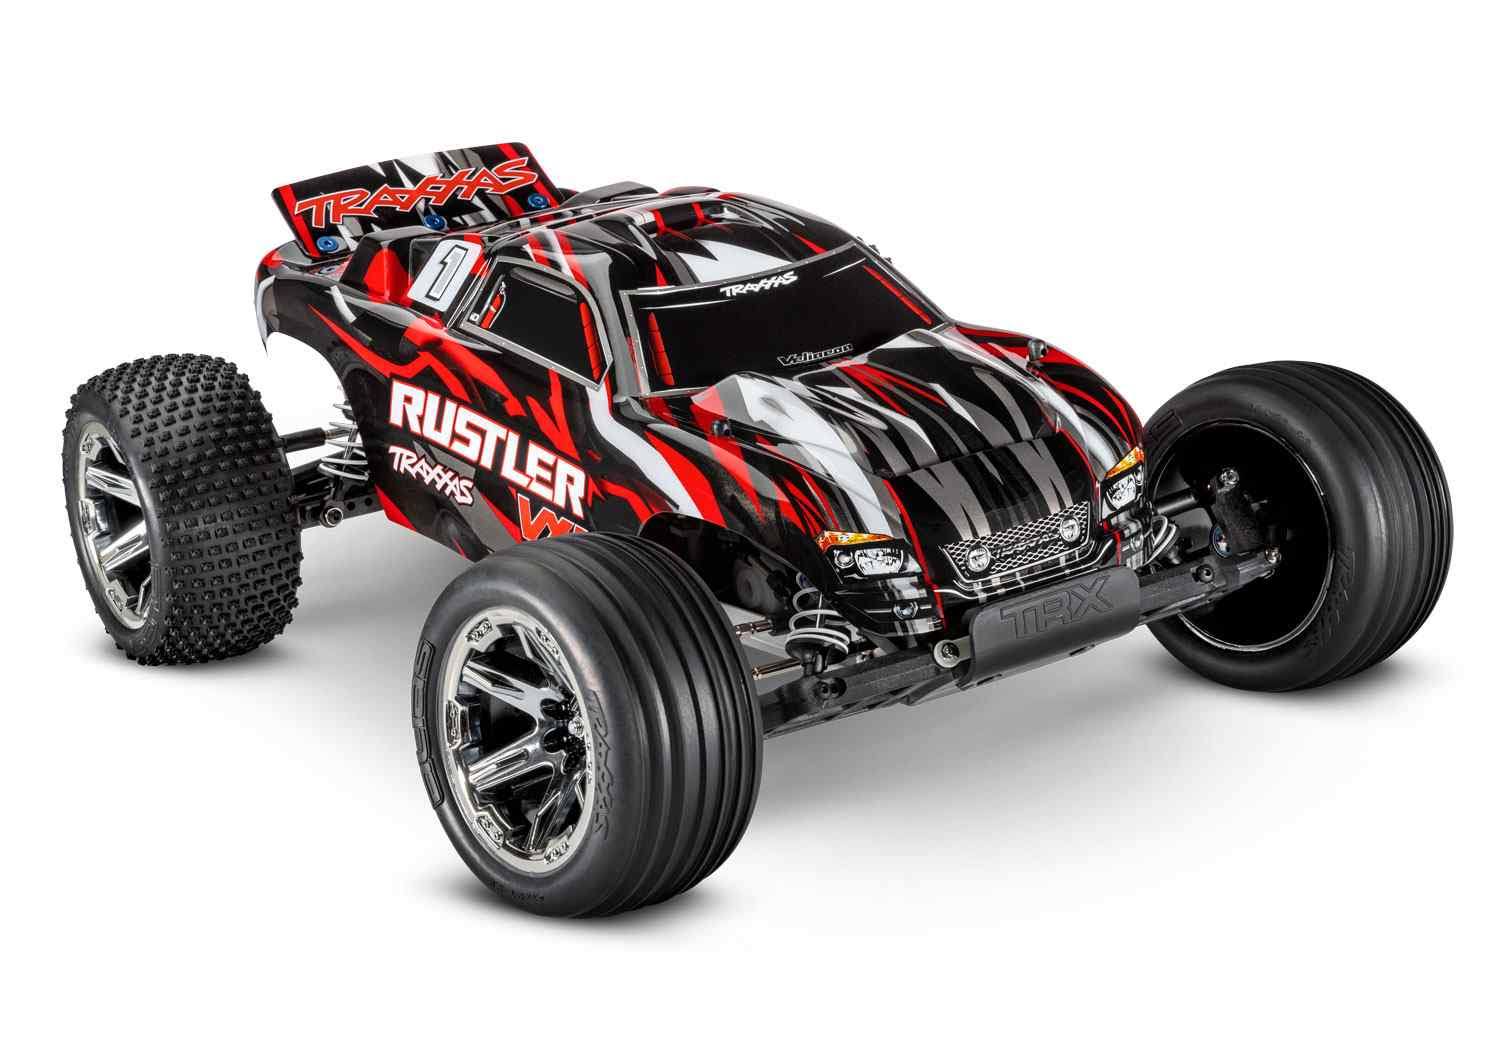 Traxxas 1/10 Rustler VXL 2WD RTR Stadium Truck with Magnum 272R - Red